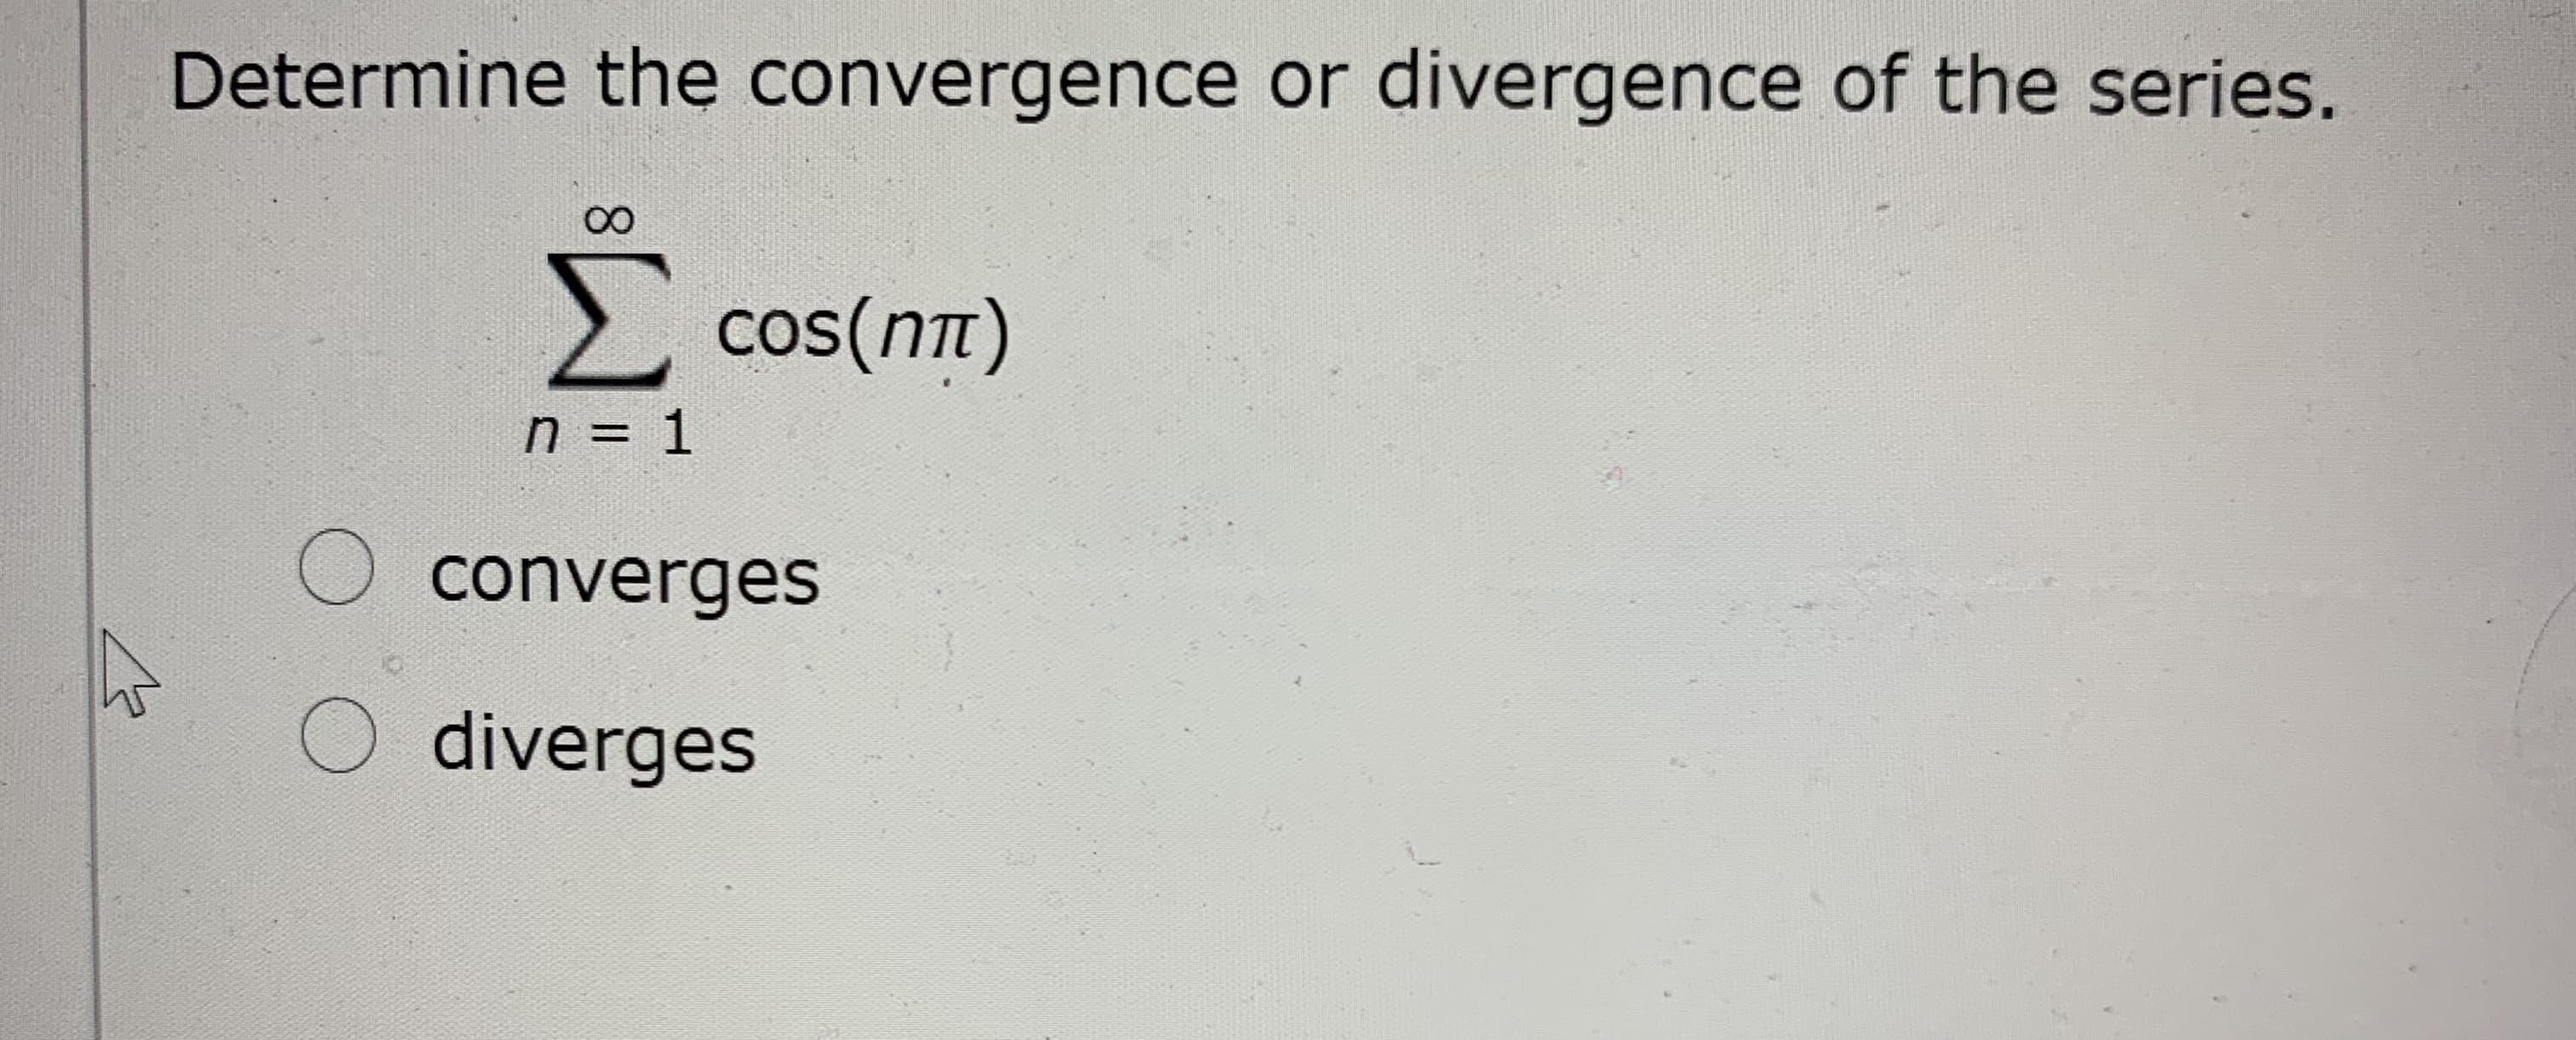 Determine the convergence or divergence of the series.
00
cos(nTt)
n = 1
O converges
O diverges
